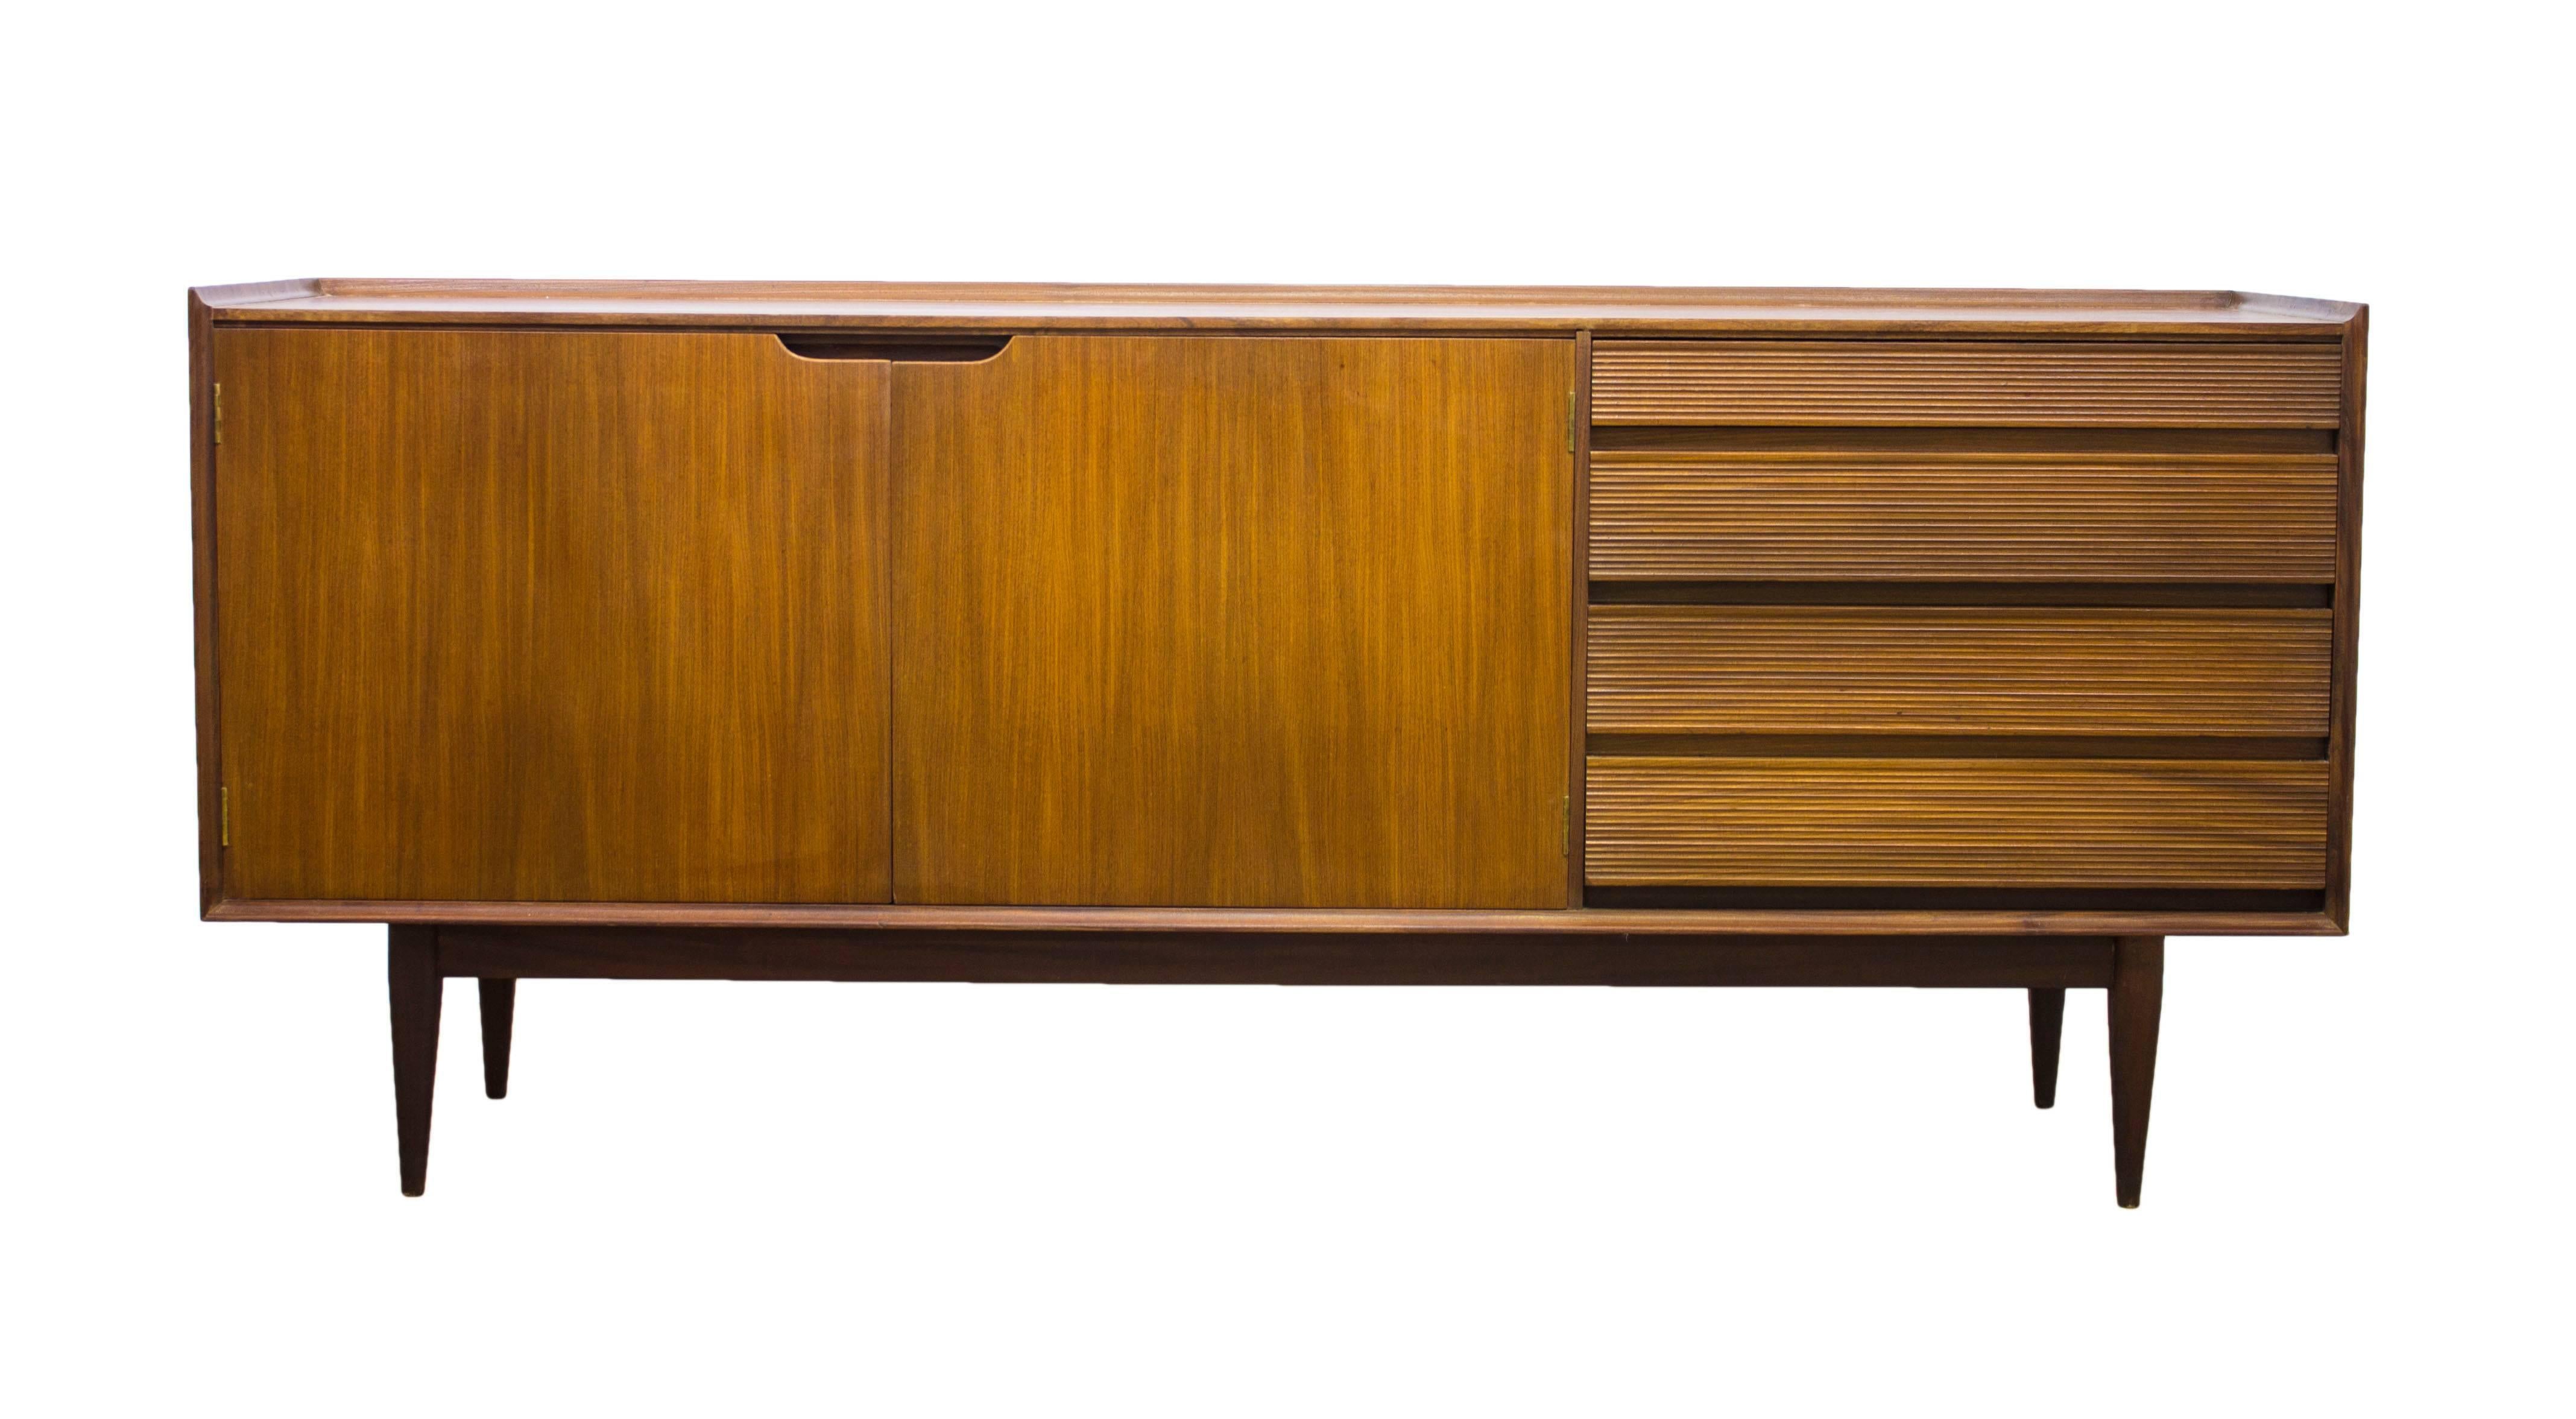 Designing for Fine Lady Furniture, Richard Hornby shot to fame during the mid century period with his stunning designs which graced the halls of Heals quickly becoming much sought after and inspirational, aspirational pieces.

In rich Afromosia,